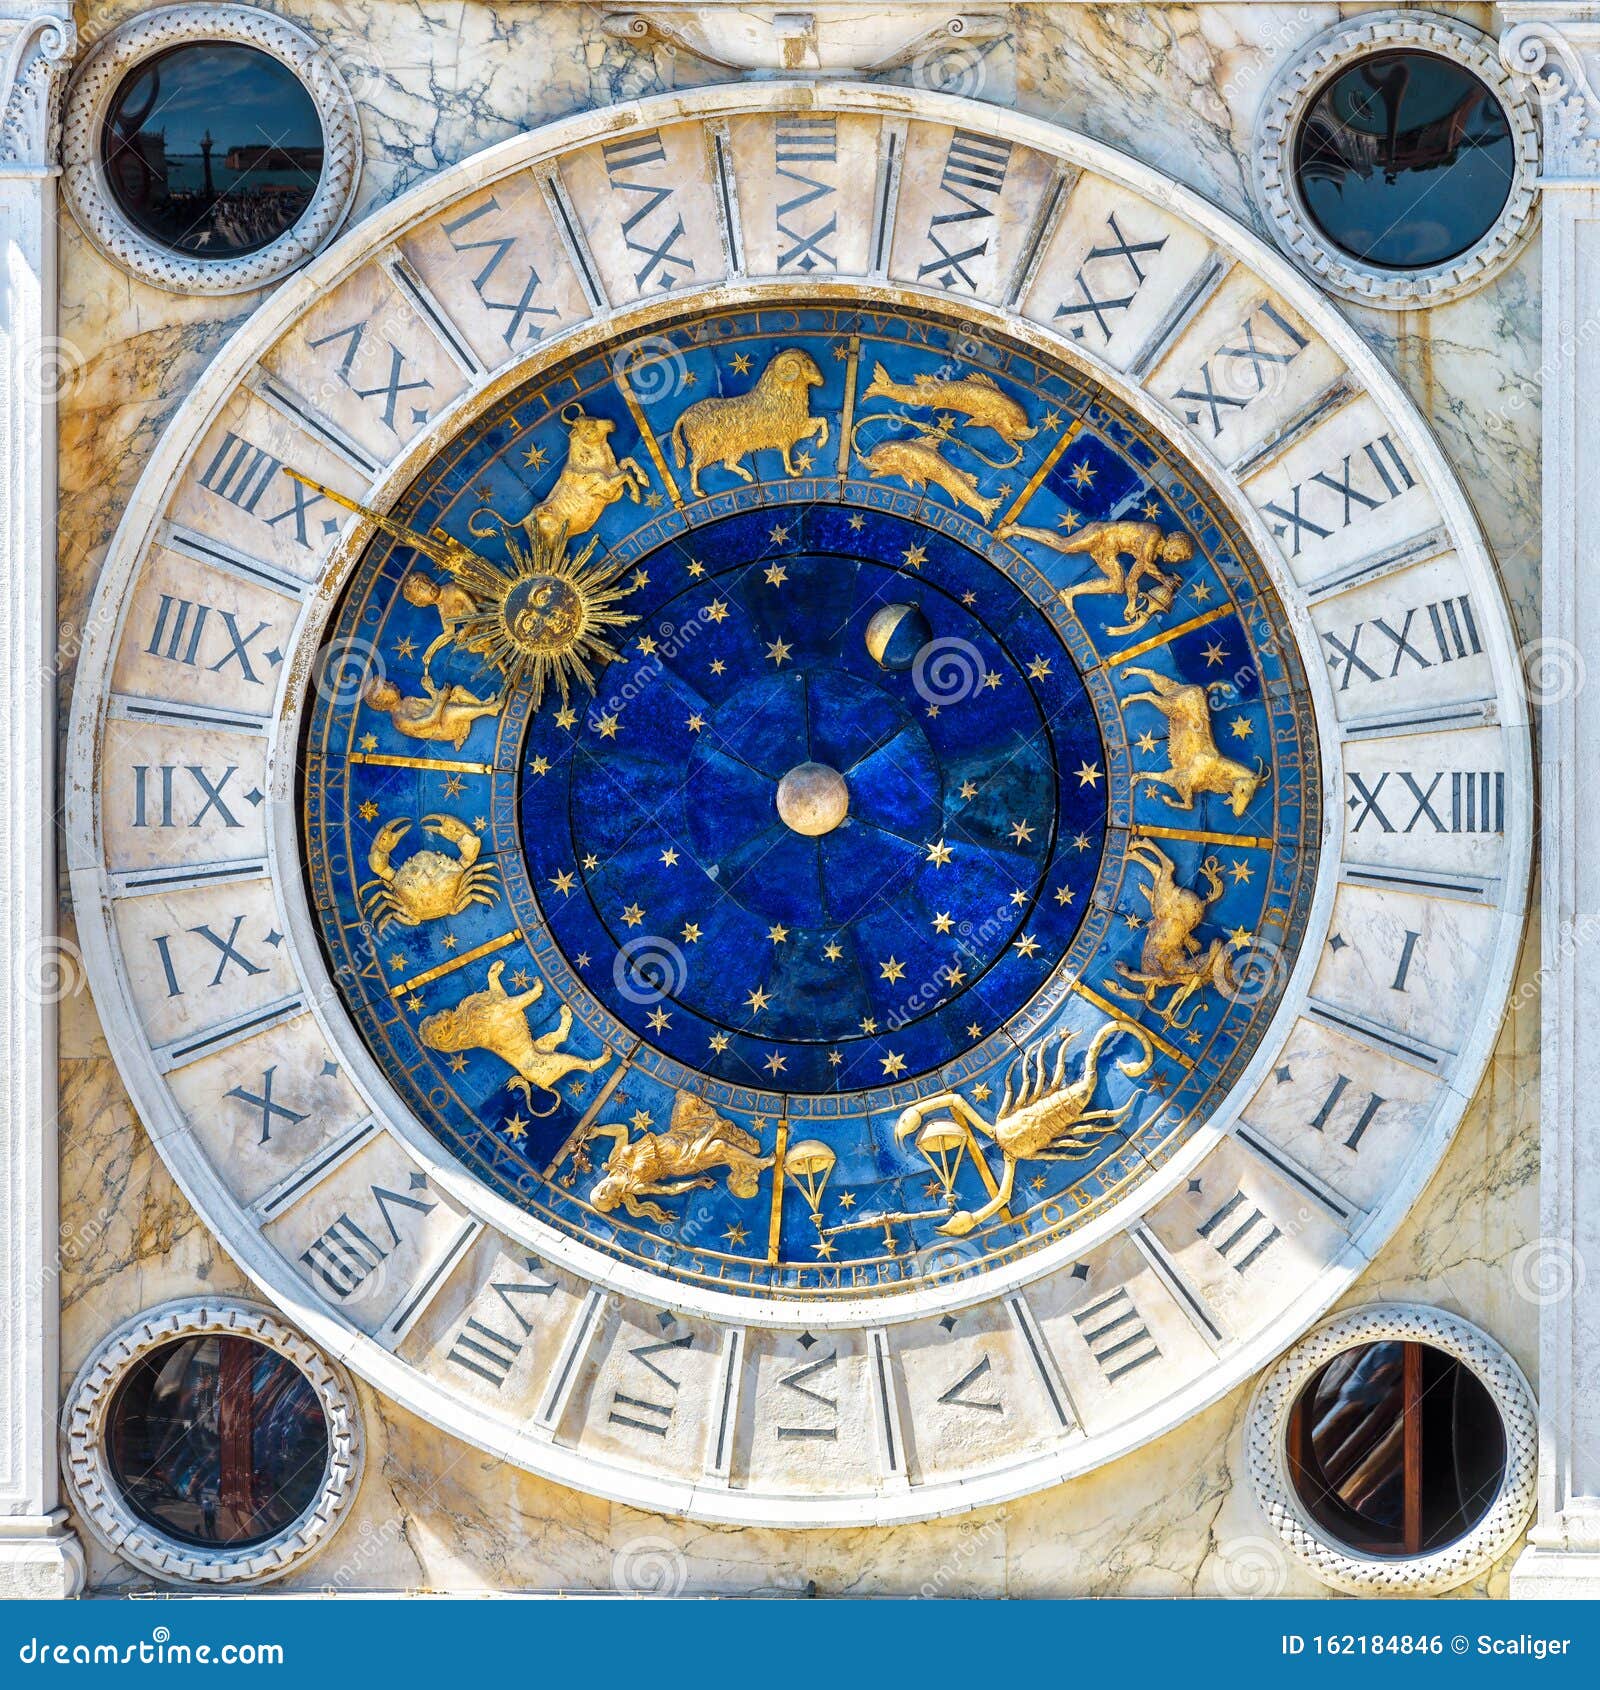 ancient clock torre dell`orologio with zodiac signs, venice, italy. it is old landmark of venice